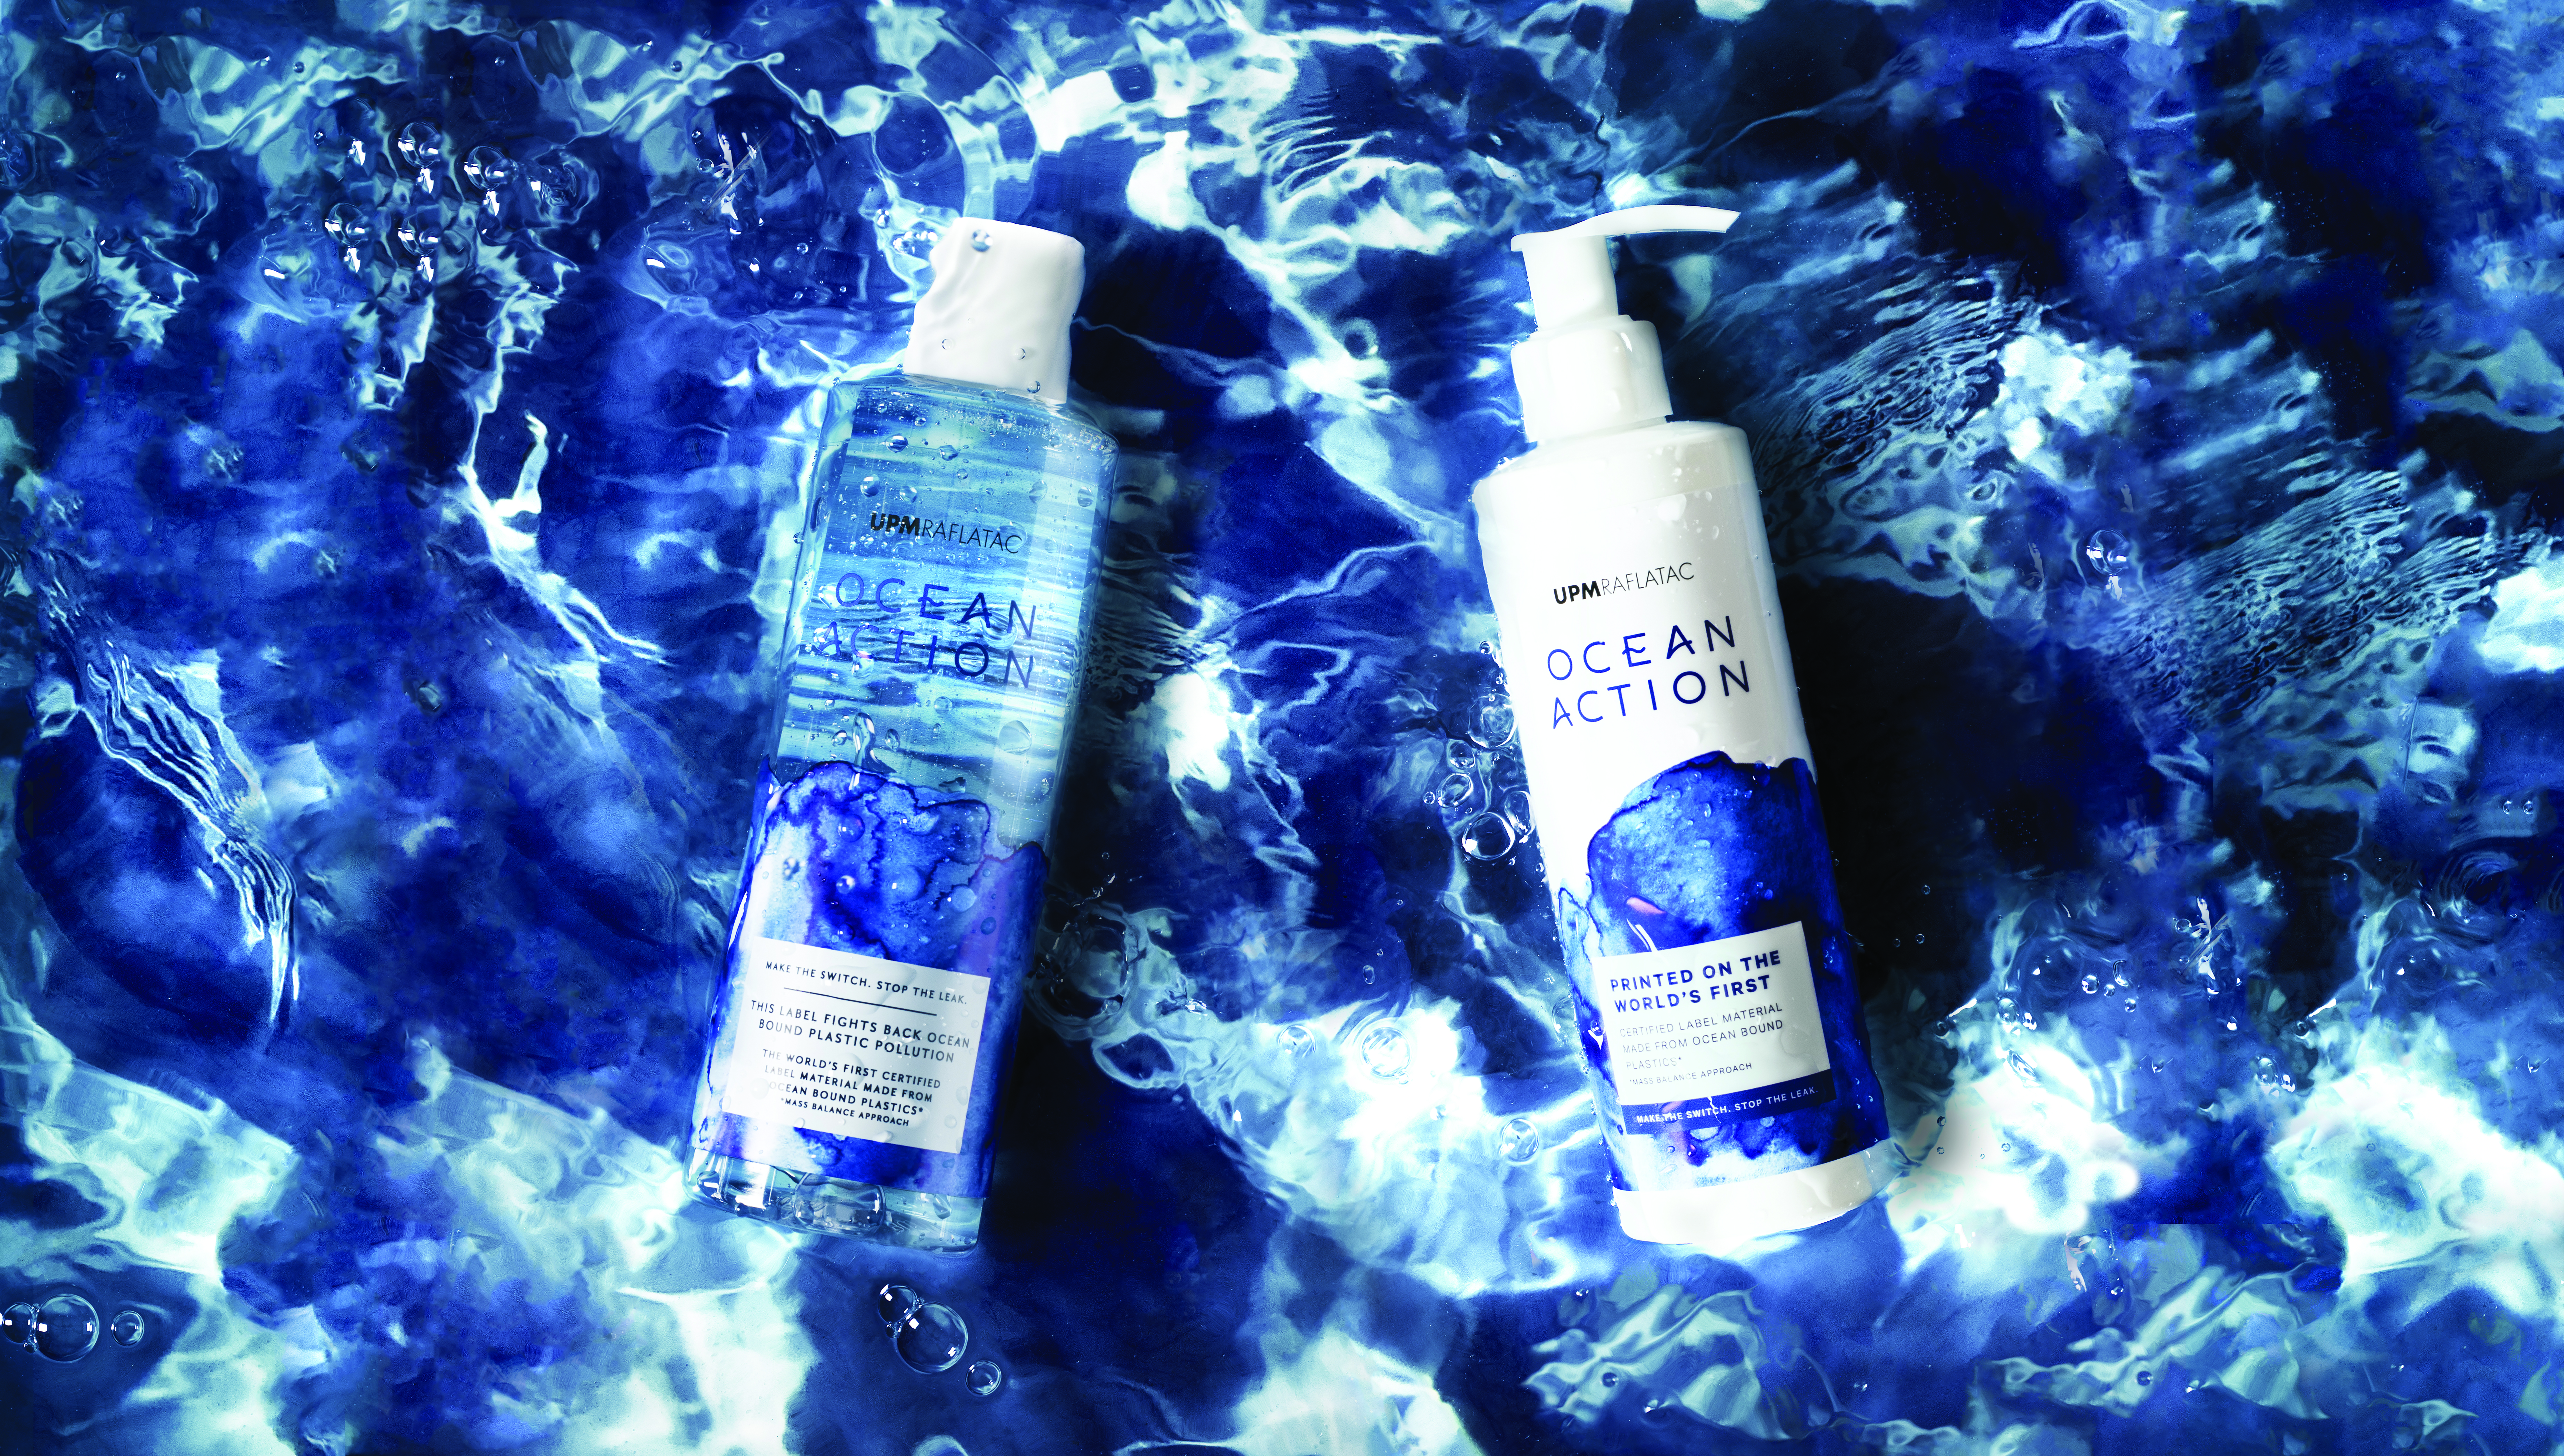 UPM Raflatac Ocean Action label is the world’s first label material made with ocean-bound plastic